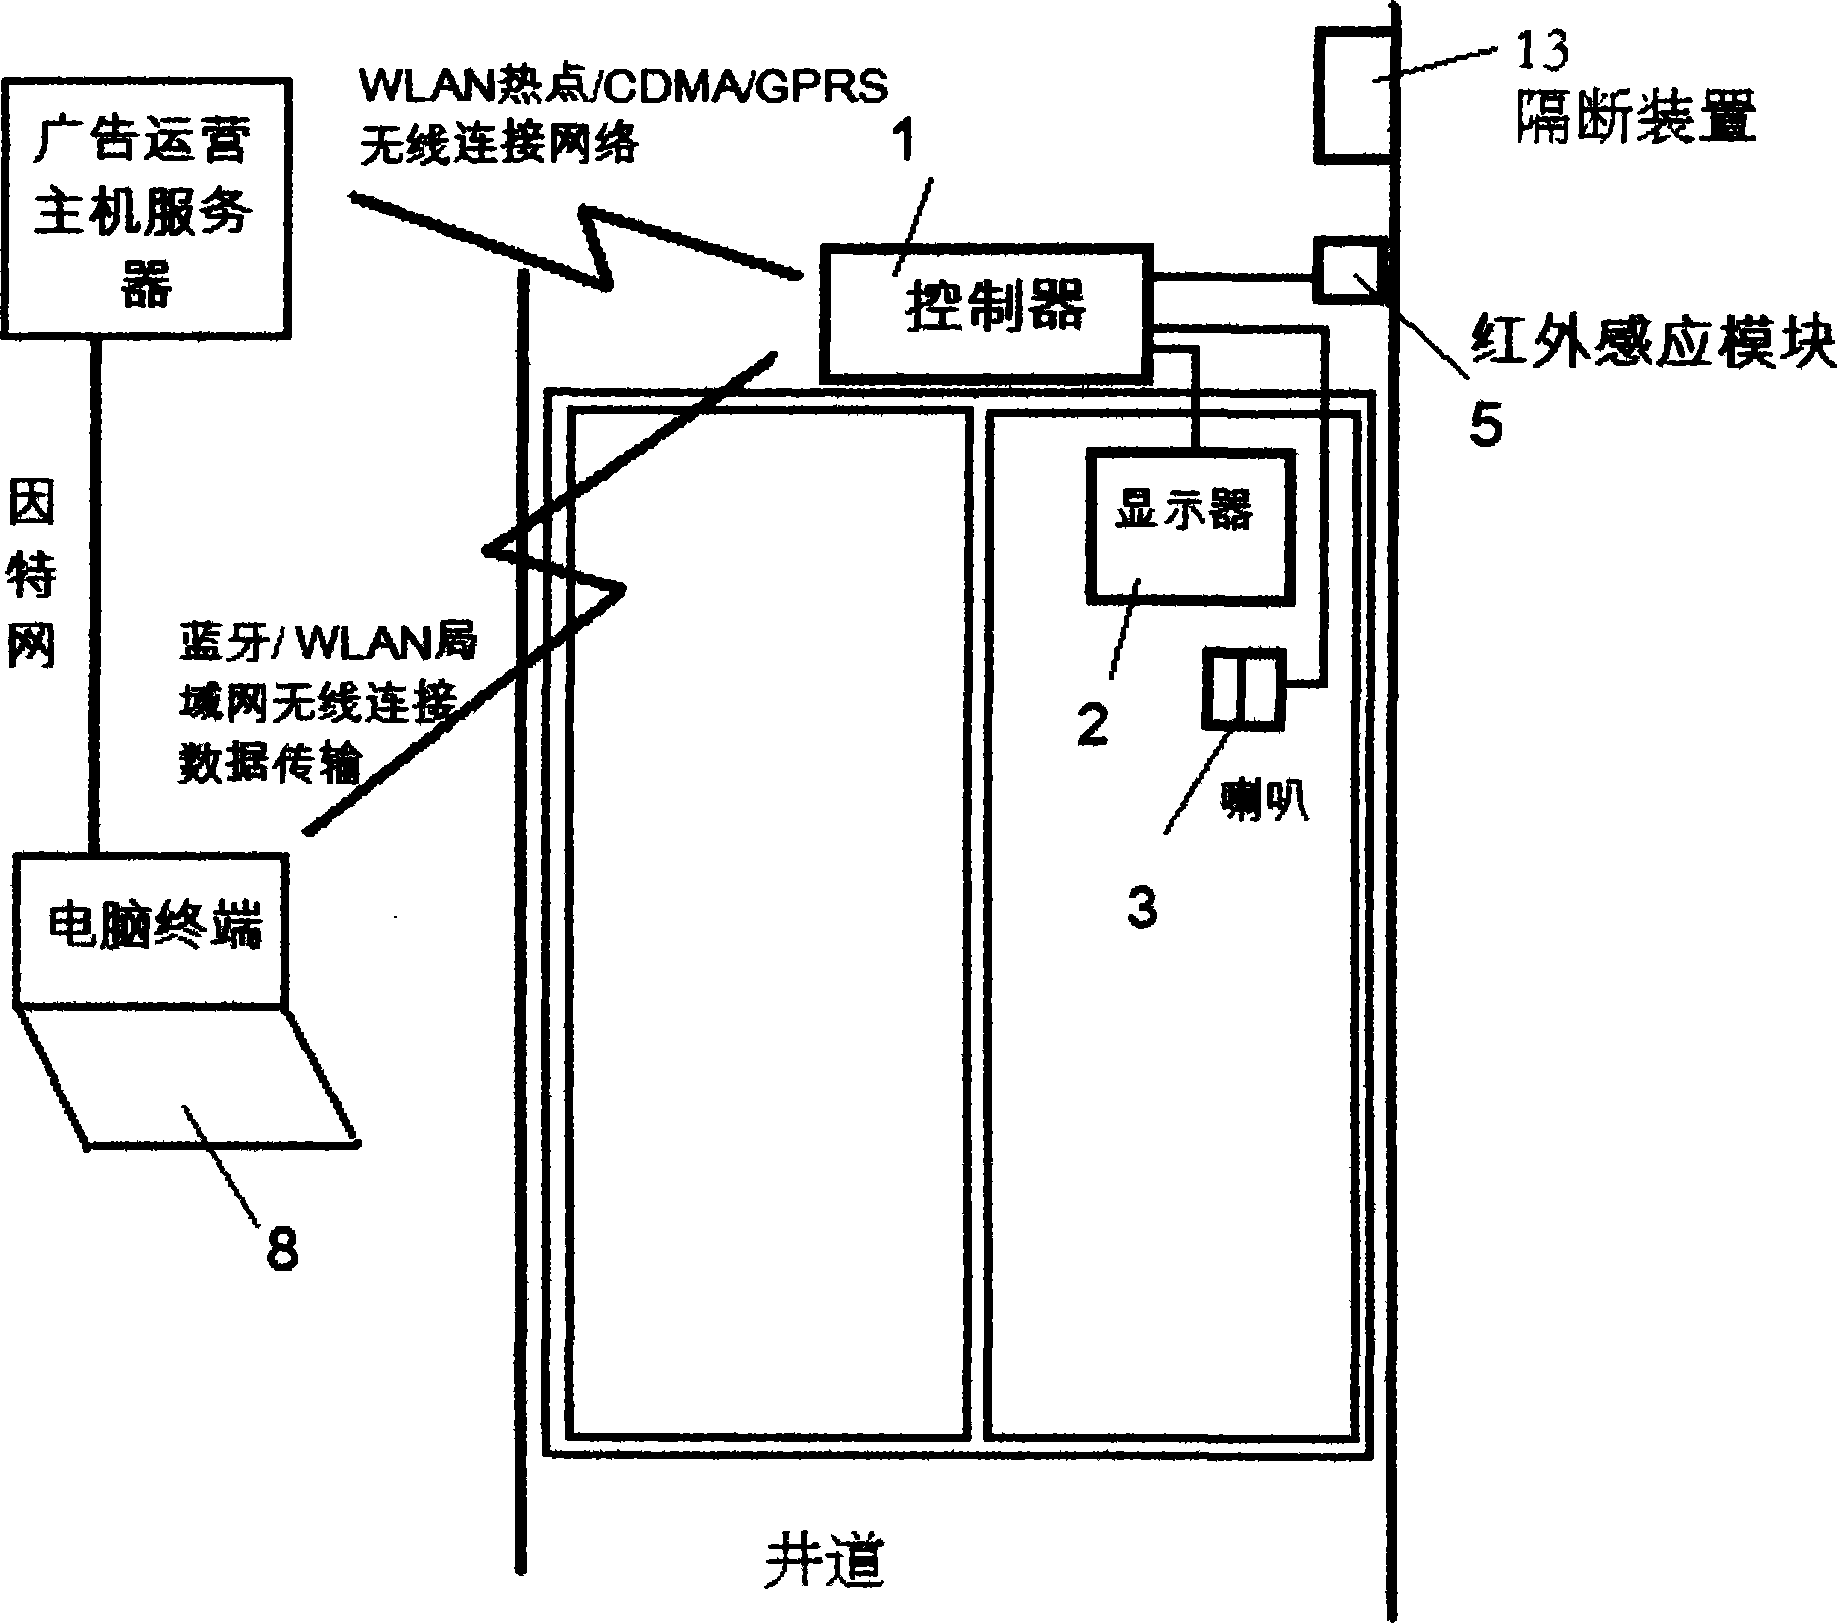 Elevator automatic broadcasting and video display multimedia advertisement method and device